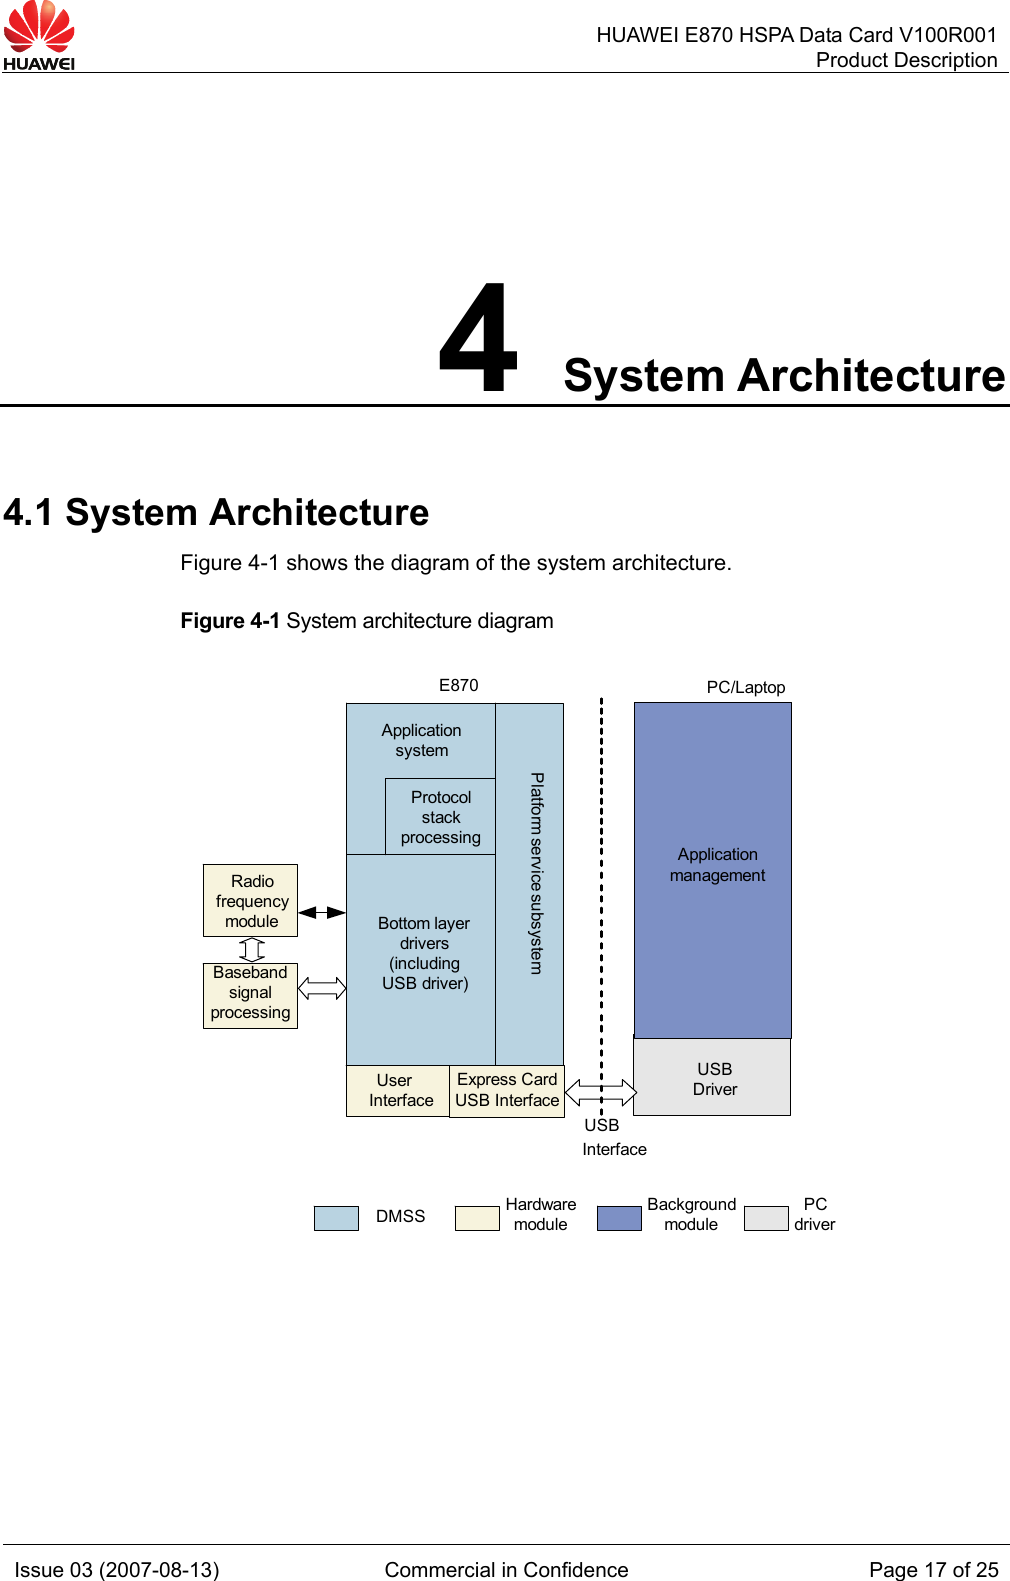   HUAWEI E870 HSPA Data Card V100R001Product Description Issue 03 (2007-08-13)  Commercial in Confidence  Page 17 of 25 4 System Architecture 4.1 System Architecture Figure 4-1 shows the diagram of the system architecture. Figure 4-1 System architecture diagram  E870 PC/LaptopProtocolstackprocessingDMSS BackgroundmoduleApplicationsystemHardwaremodulePCdriverUSBDriverRadiofrequencymoduleBasebandsignalprocessingBottom layerdrivers(includingUSB driver)Platform service subsystemApplicationmanagementUserInterfaceUSBInterfaceExpress CardUSB Interface  